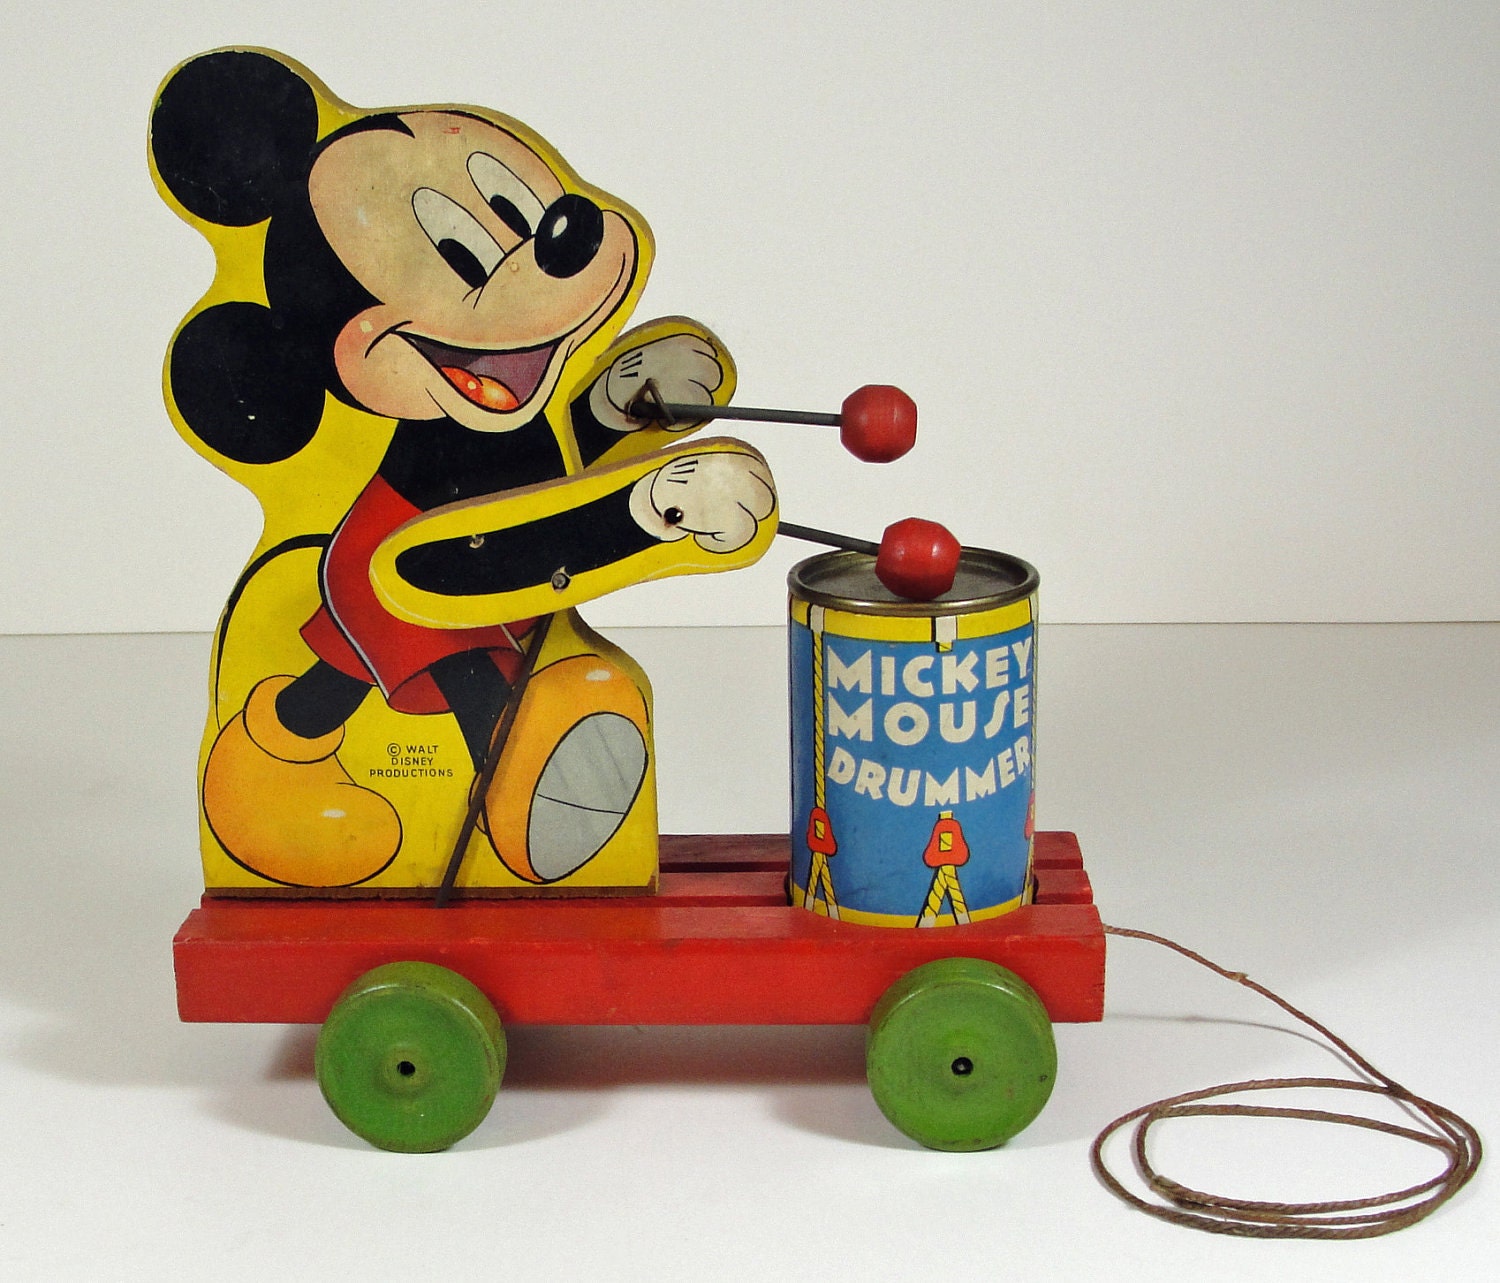  Pull Toy No. 476 Rare Vintage Fisher Price Wooden Toy Kids Room Decor